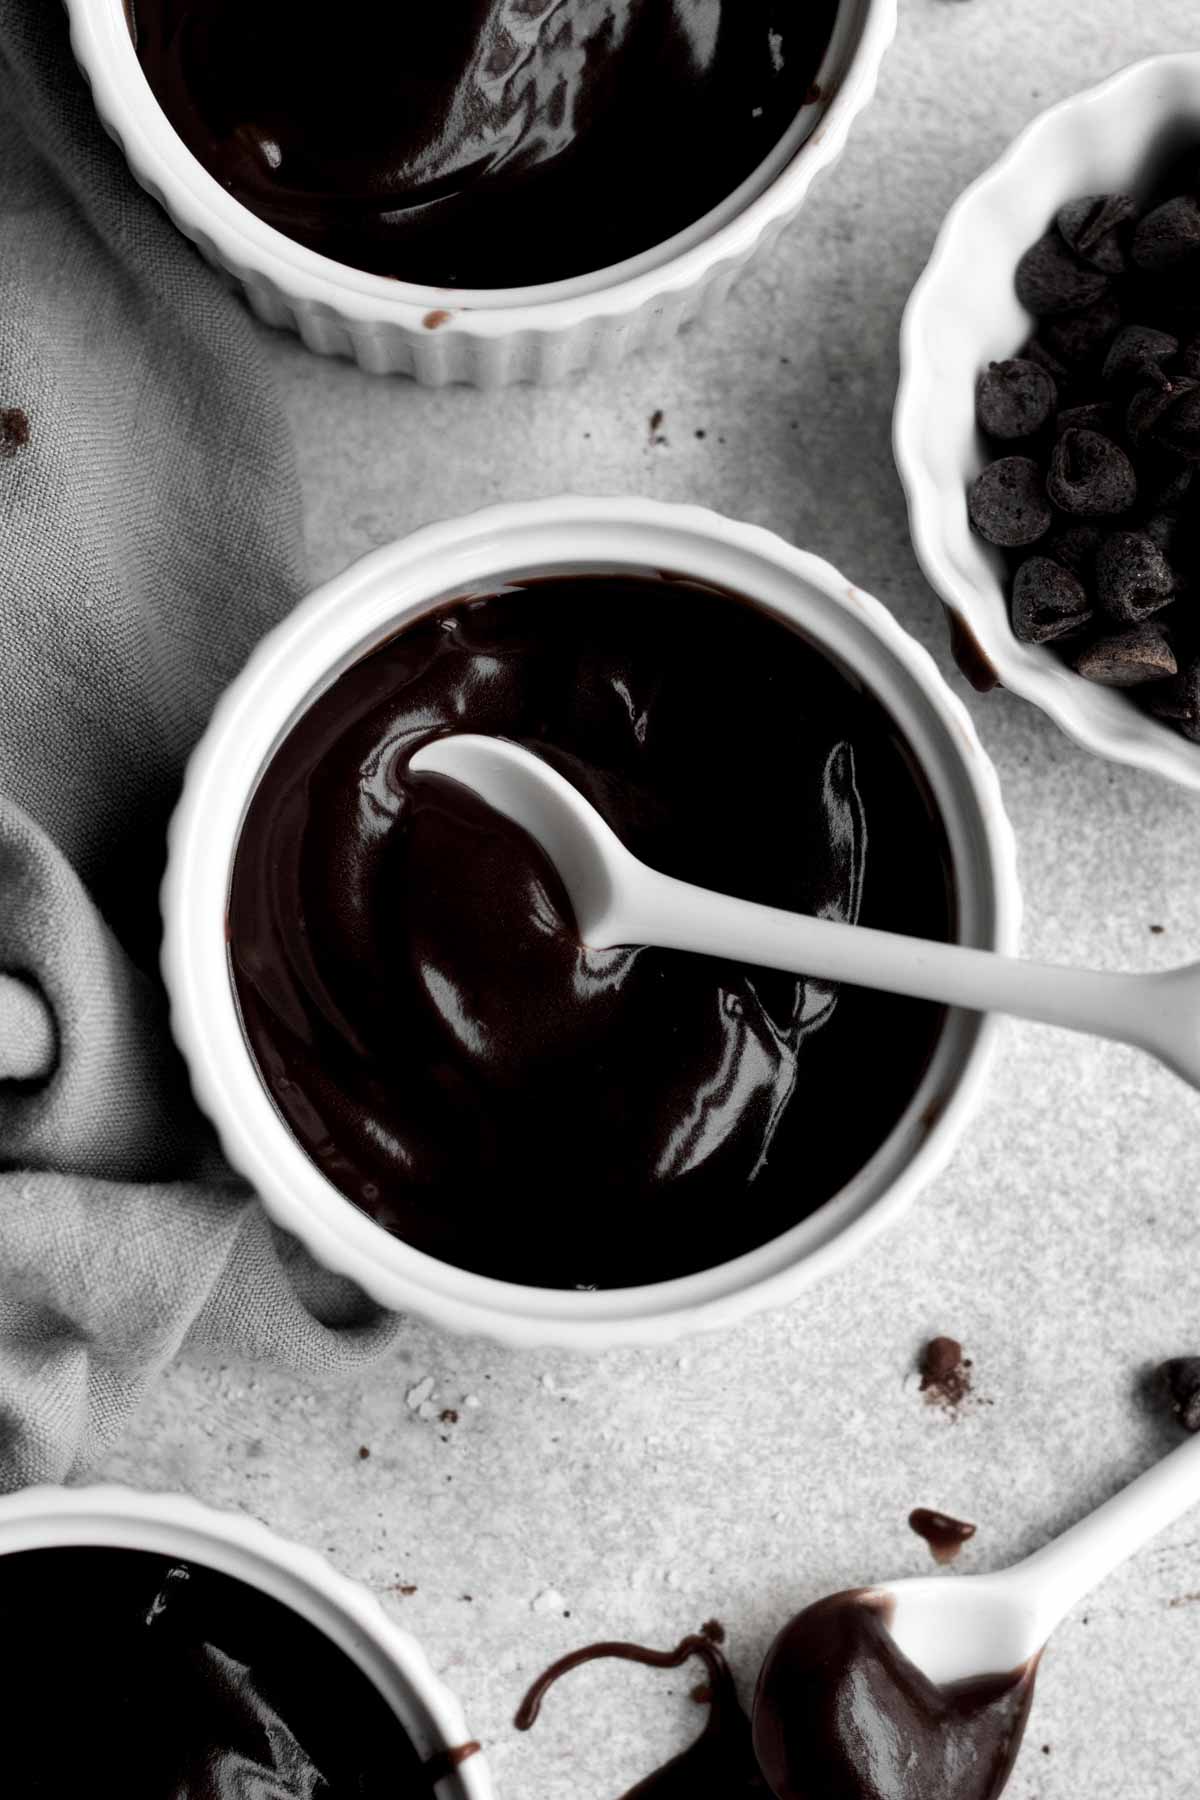 A spoon scoops chocolate pudding.